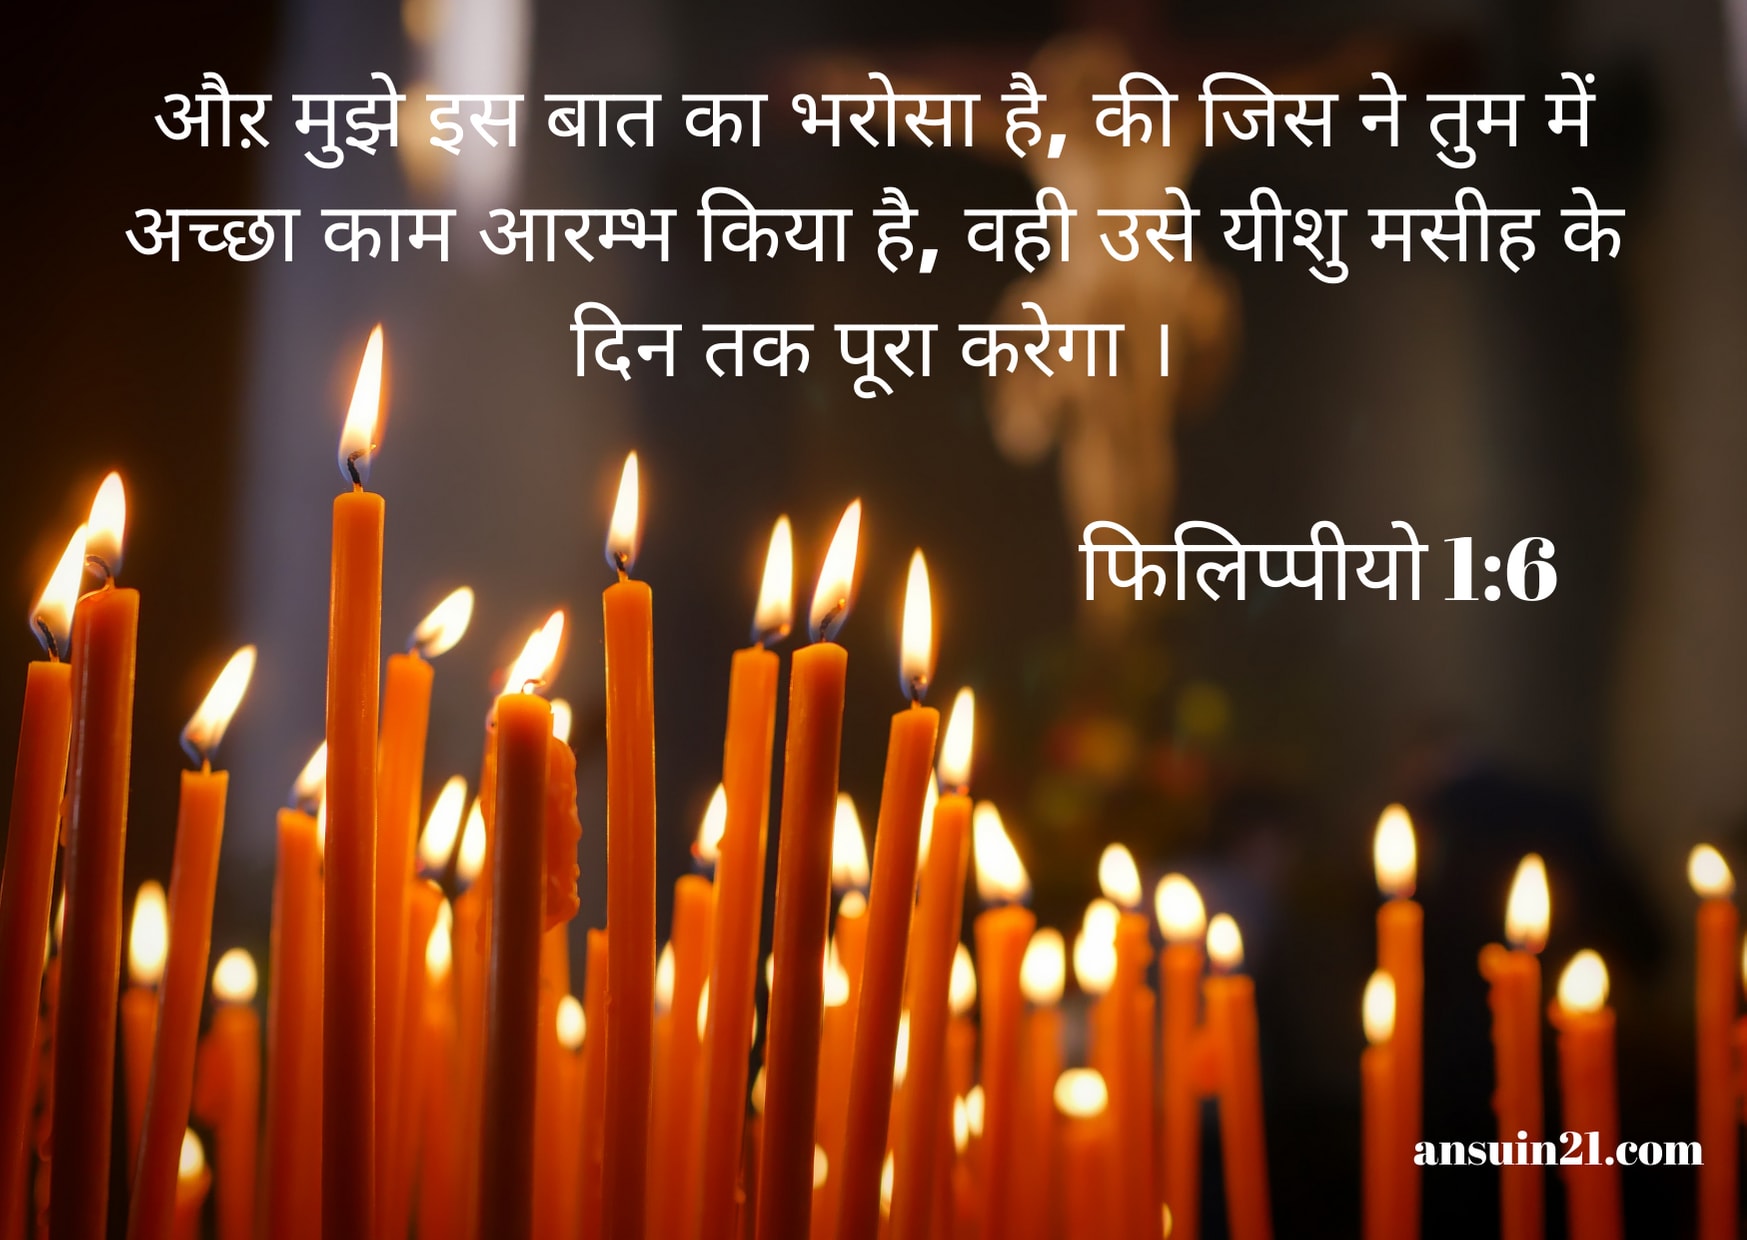 Bible Verses In Hindi Images, Quotes, Inspirational Words,